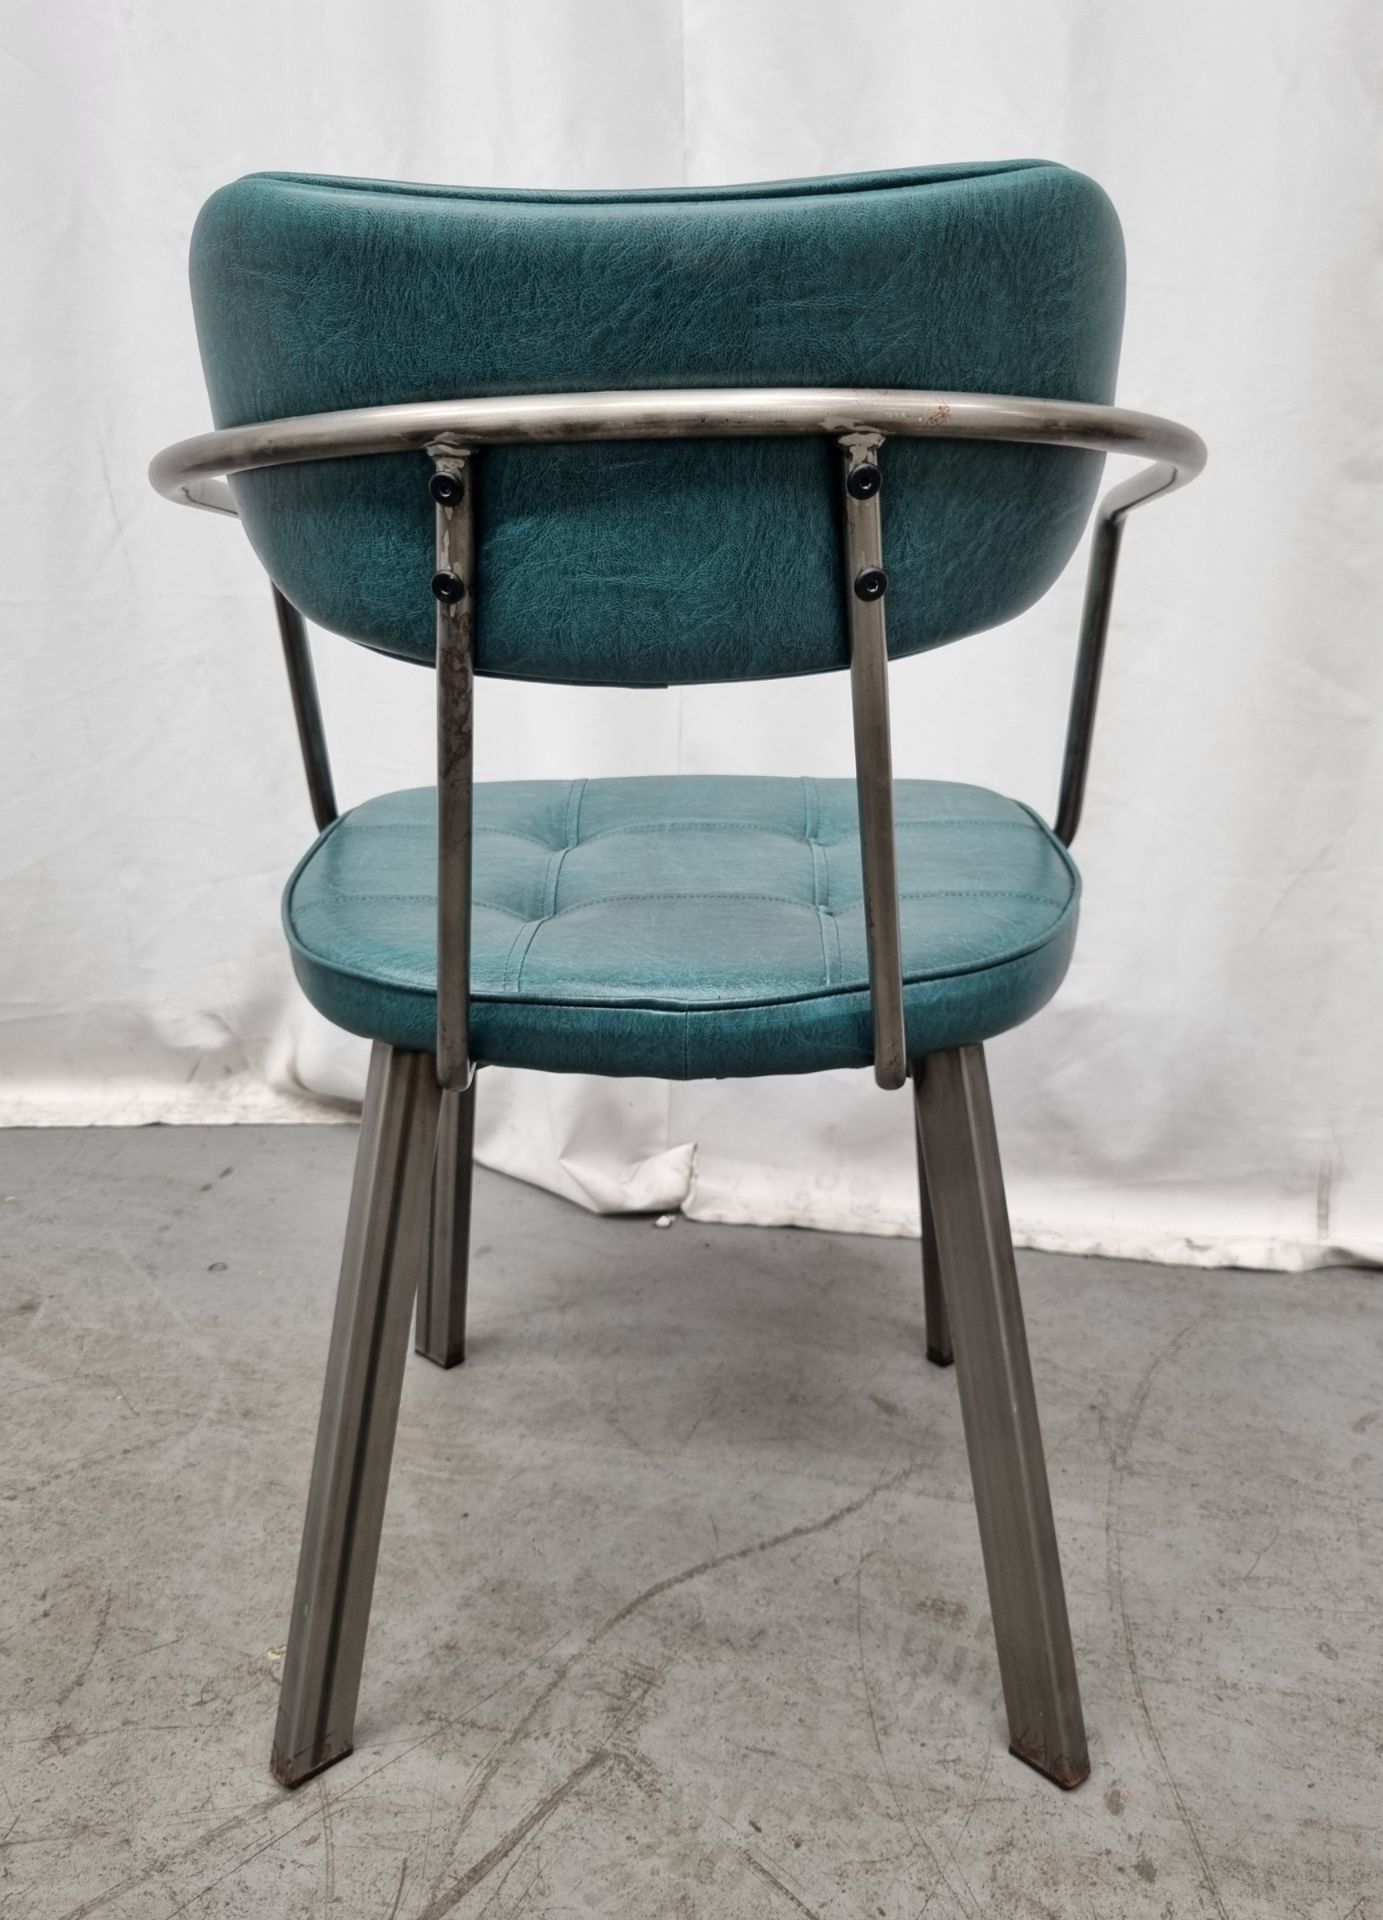 4x Industrial green leather restaurant chairs - L 550 x W 600 x H 80cm - Image 9 of 11